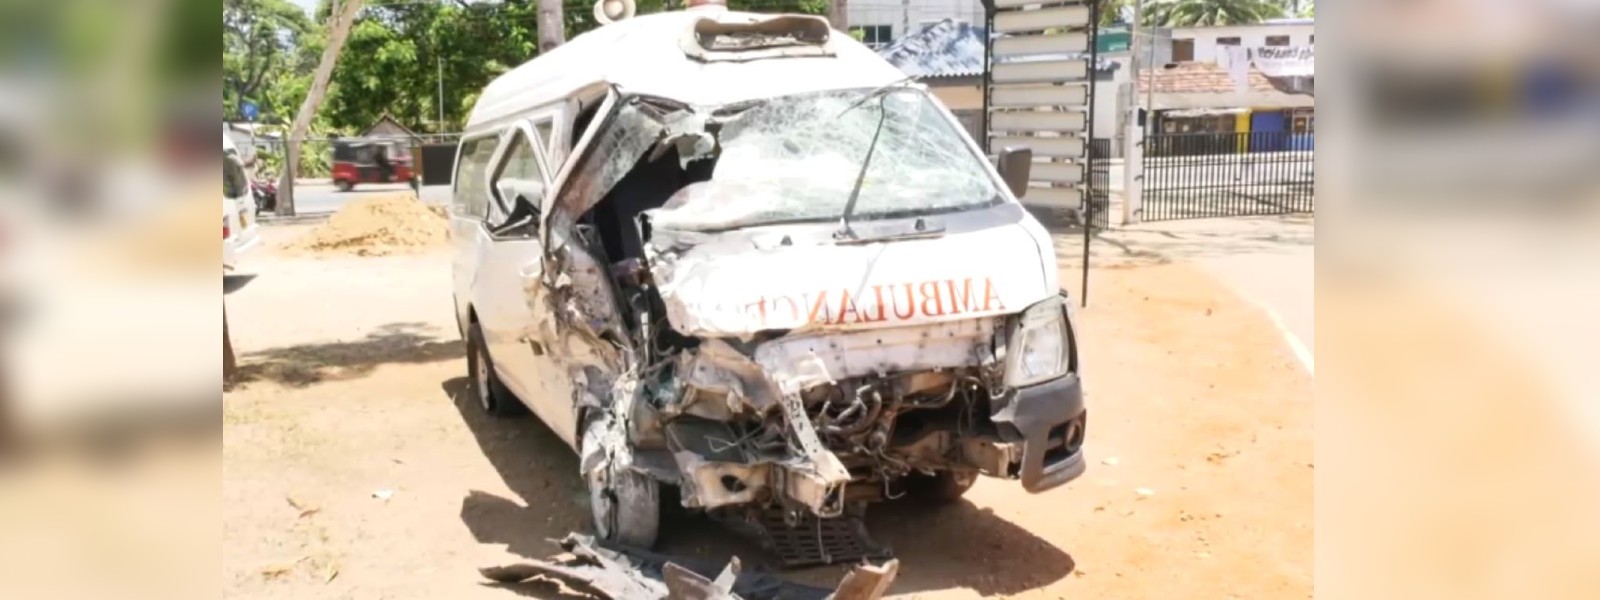 Ambulance driver dies when transporting medicine for Covid-19 patients